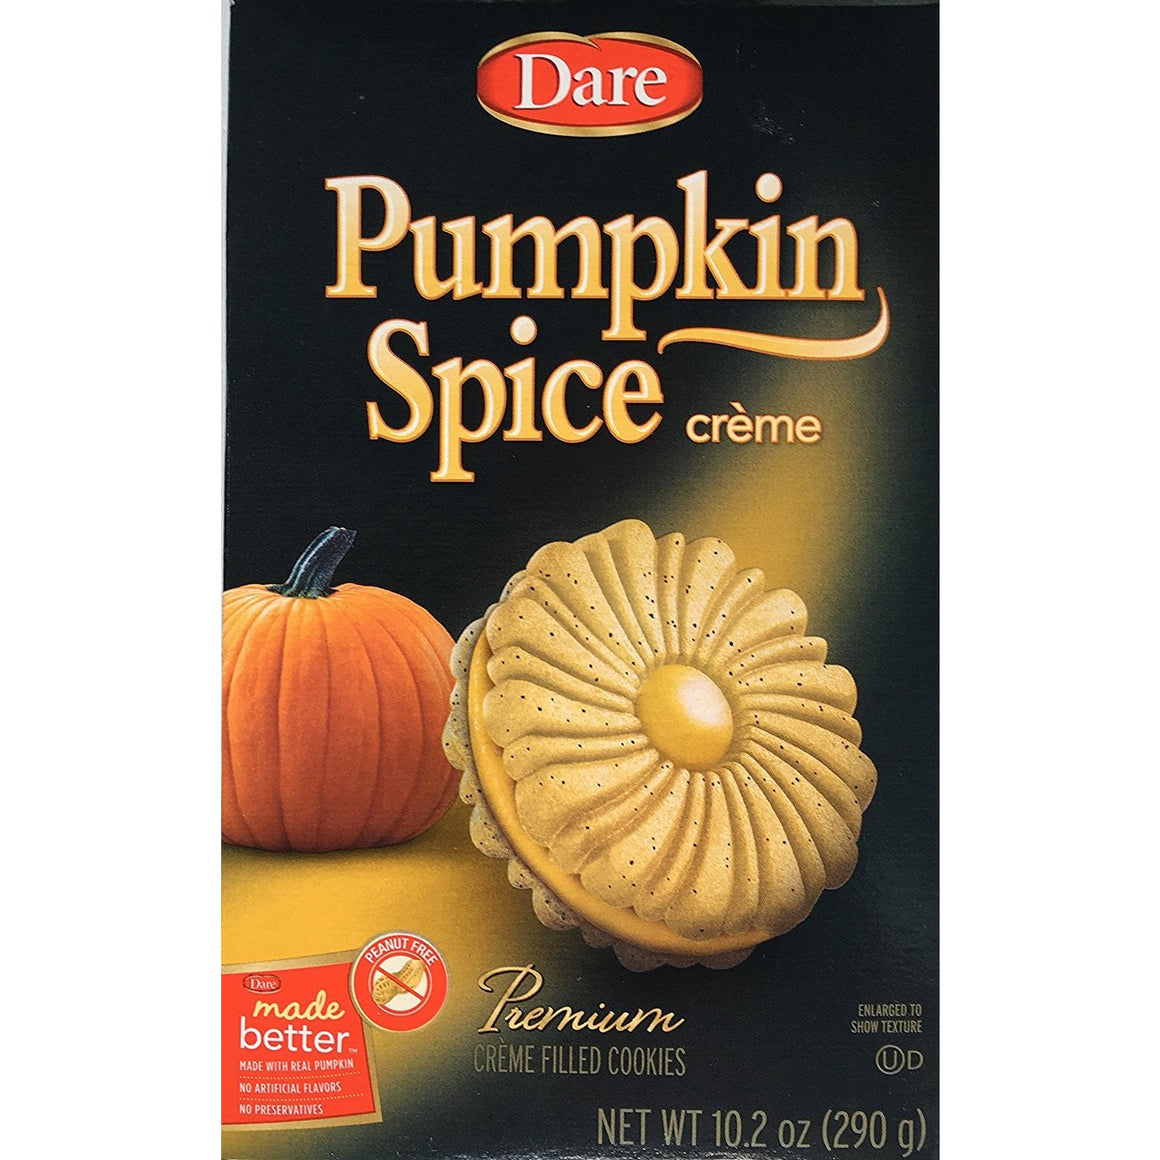 All City Candy Dare Pumpkin Spice Creme Filled Cookies 10.2 oz Box Halloween Dare Foods For fresh candy and great service, visit www.allcitycandy.com